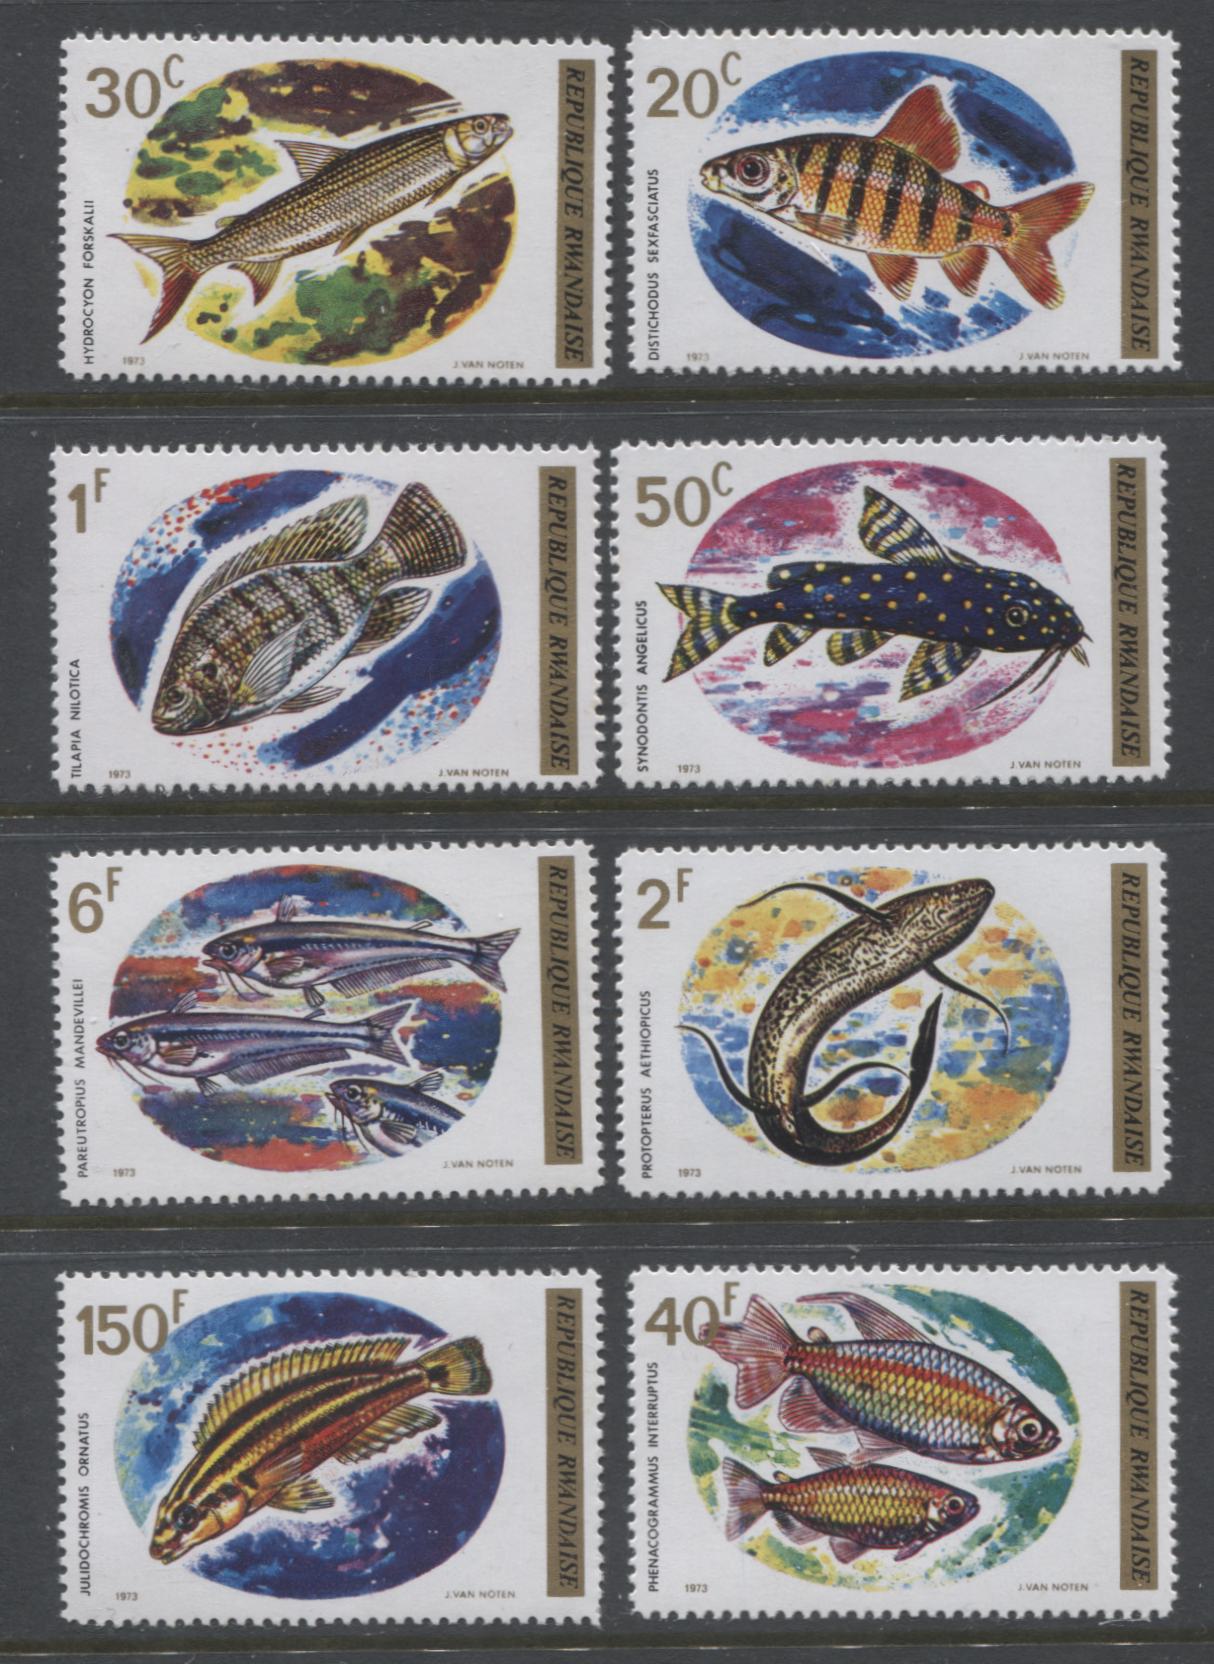 Lot 180 Rwanda SC#541-548 1973 African Fish, 8 VFNH Singles, Click on Listing to See ALL Pictures, 2017 Scott Cat. $6.95